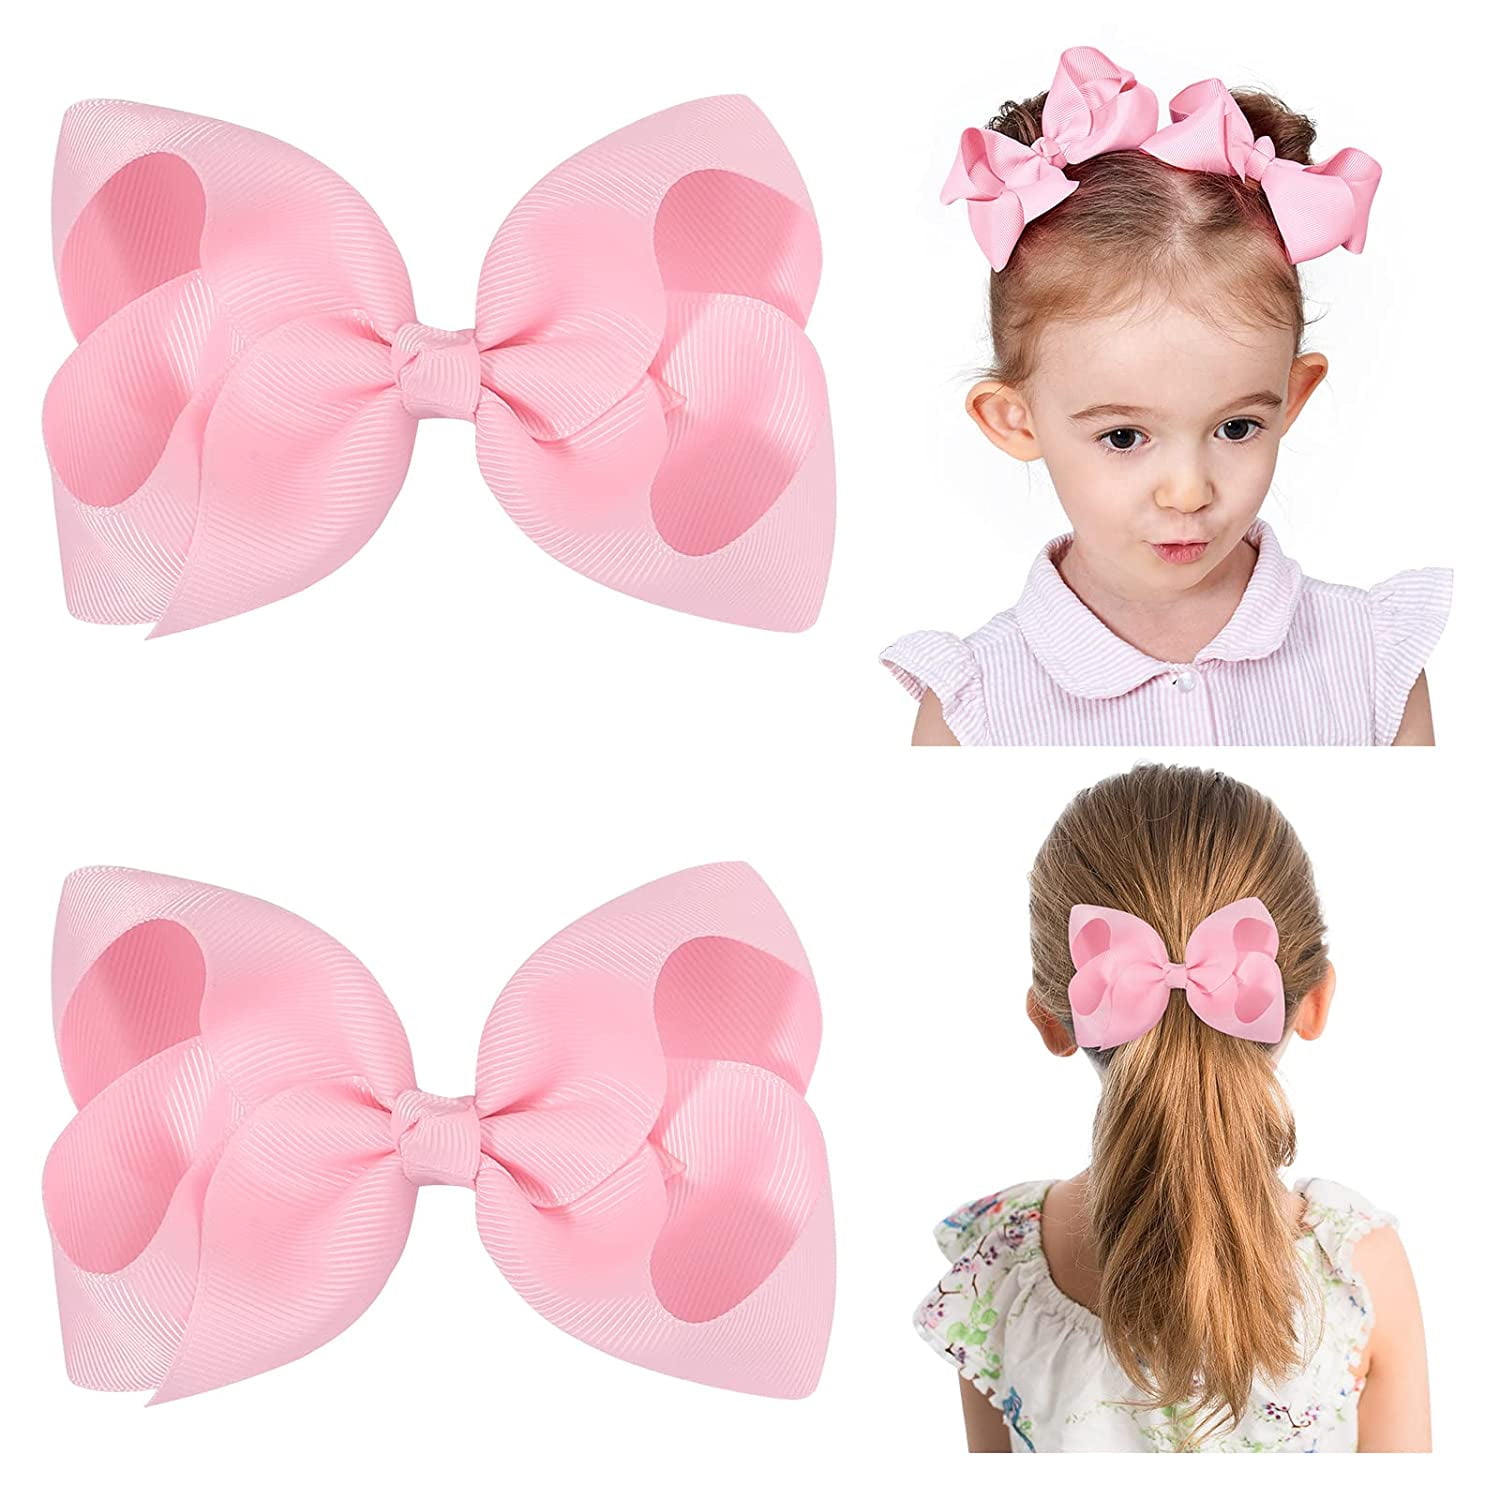 CÉLLOT 40 Pieces 4.5 Inch Hair Bows for Girls Clips Grosgrain Ribbon  Boutique Hair Bow Alligator Clips For Girls Teens Toddlers Kids in Pairs